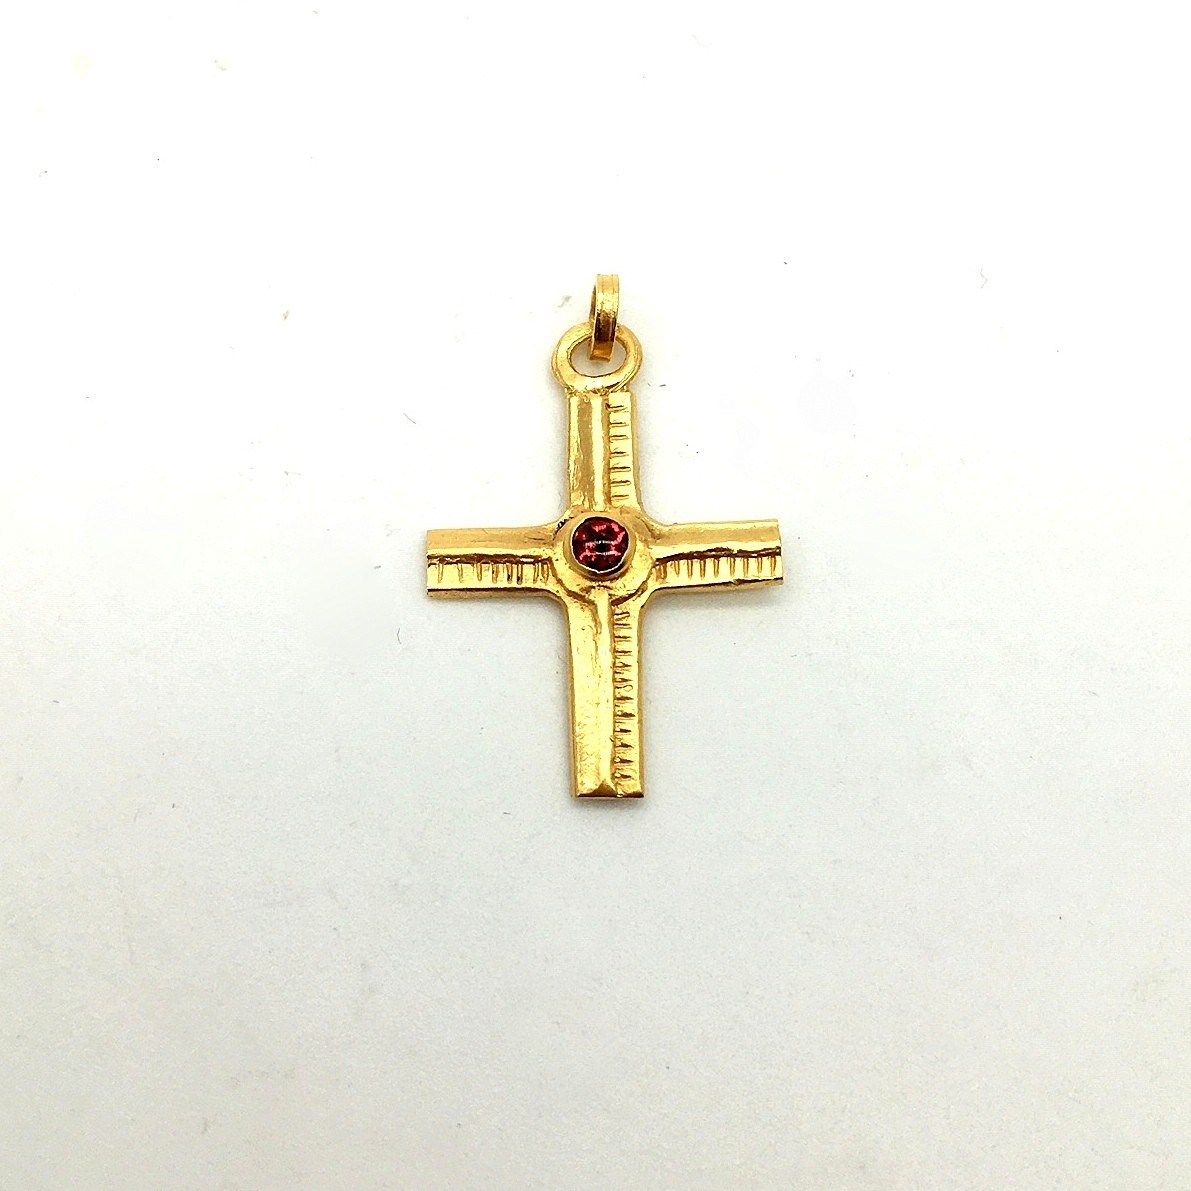 Gold or white gold cross 14K or 18K with semiprecious stones